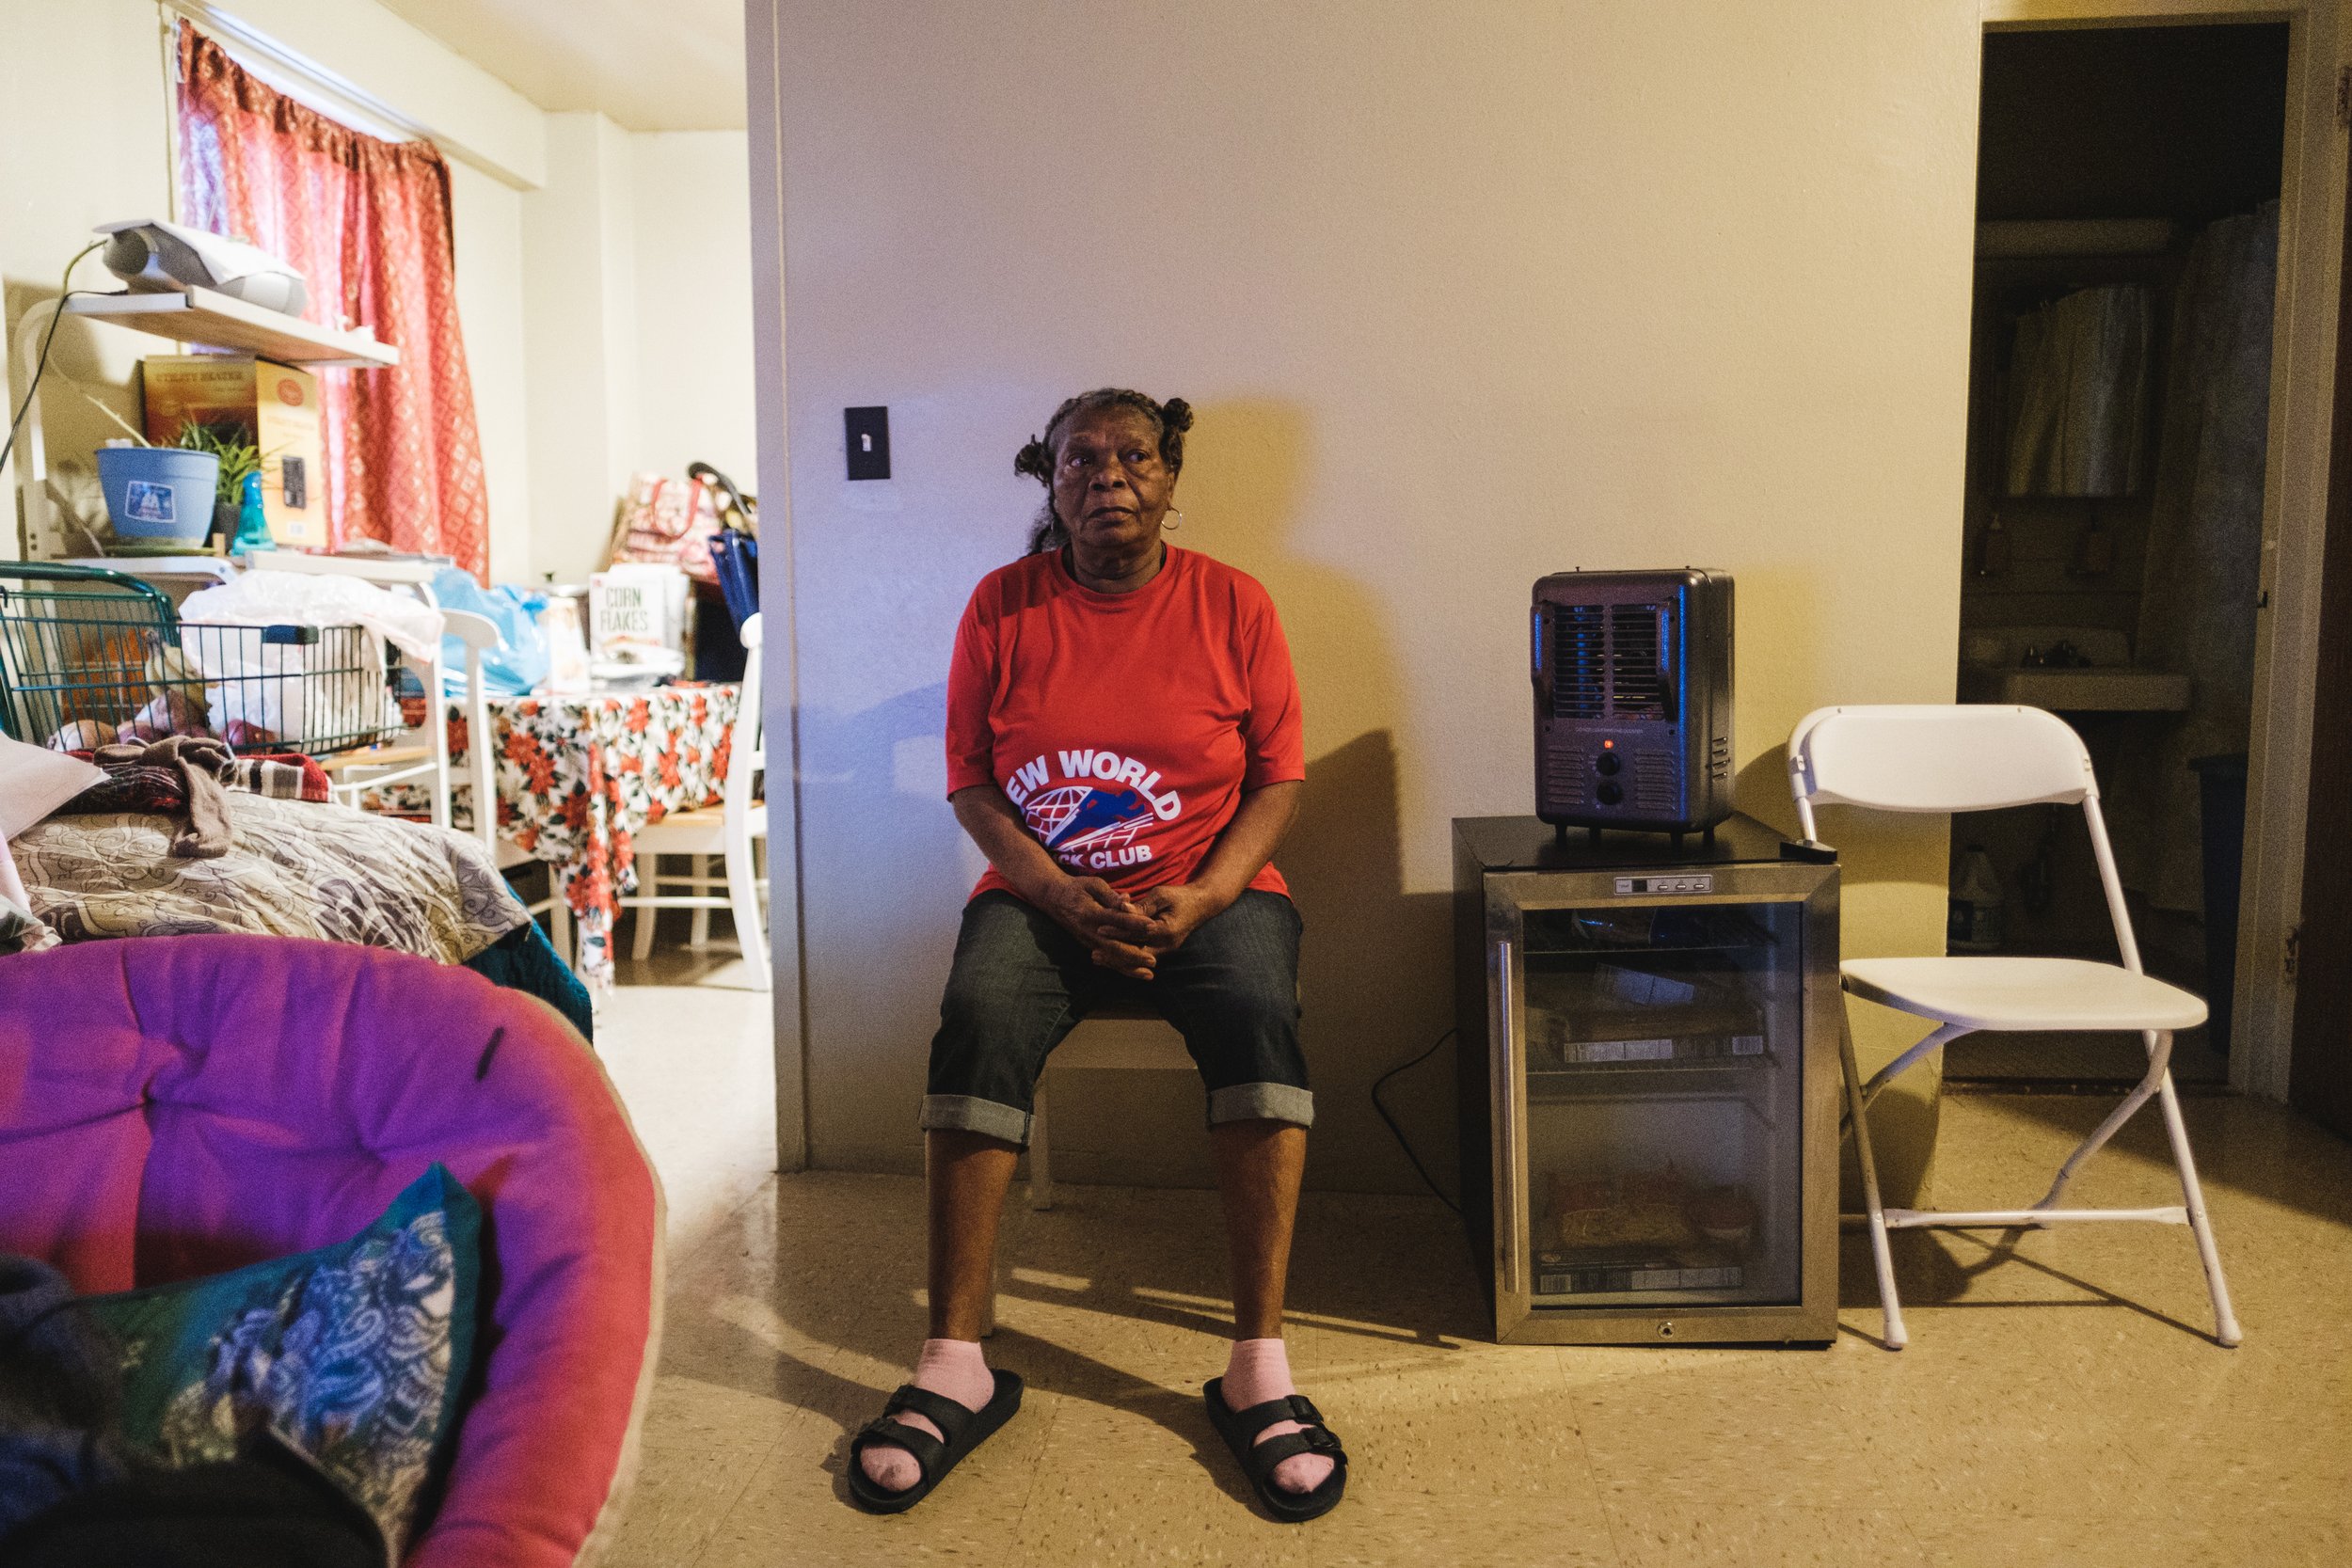  December 24, 2021 - Bronx, NY:  NYCHA resident Alejandra Ramos, 71, in her apartment, which has no heat. Ramos’ apartment building at the Bronx River Houses in the Bronx has not had heat in two weeks and despite multiple calls to the maintenance dep